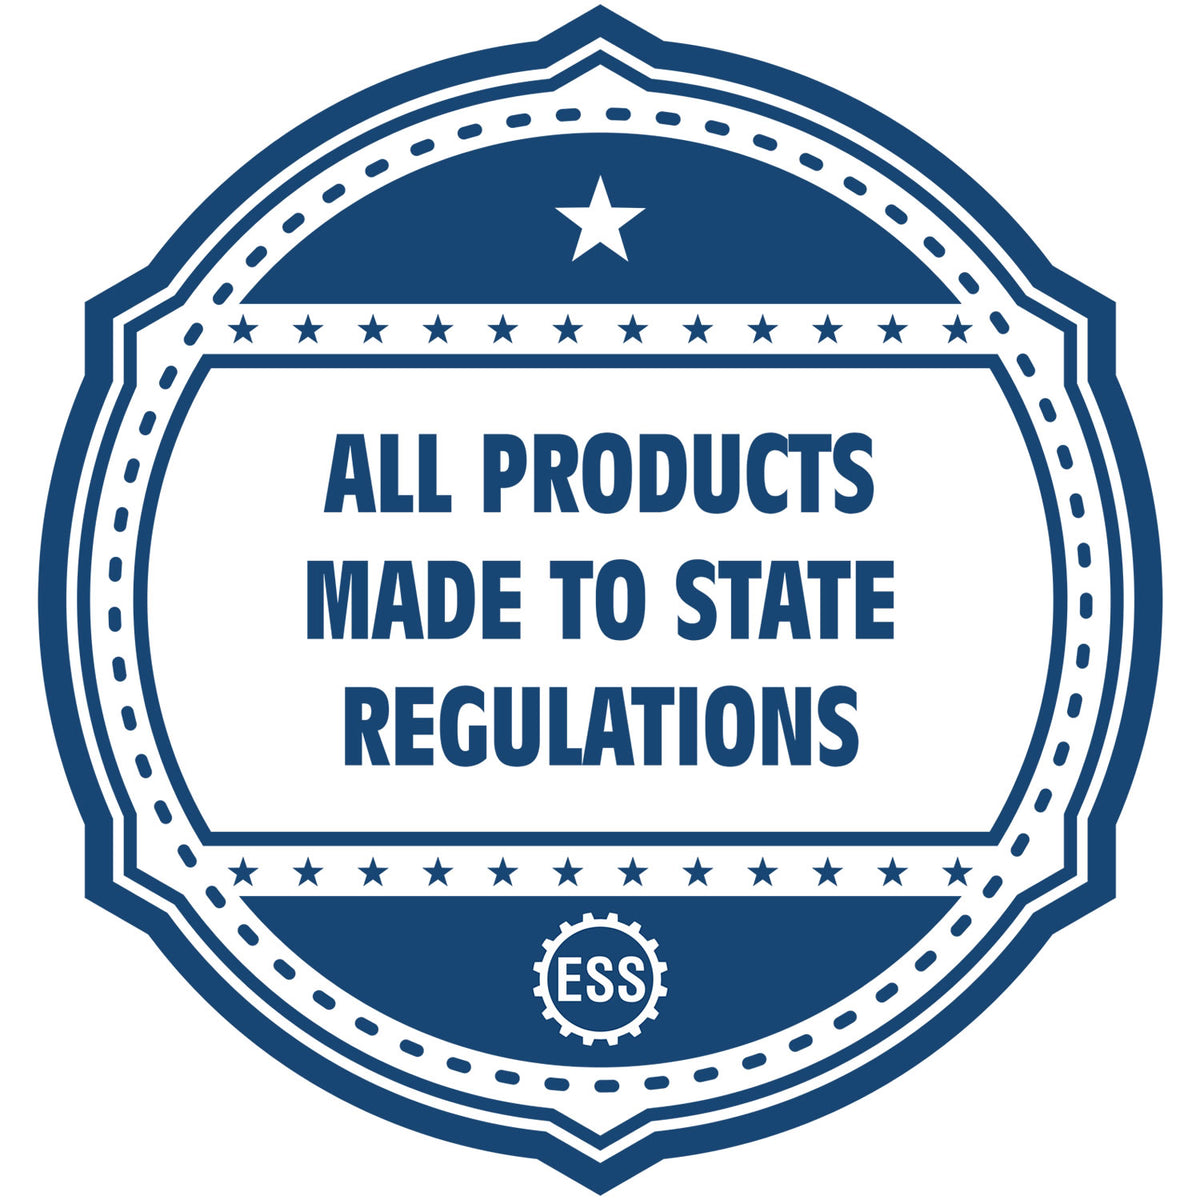 An icon or badge element for the Wooden Handle Michigan State Seal Notary Public Stamp showing that this product is made in compliance with state regulations.